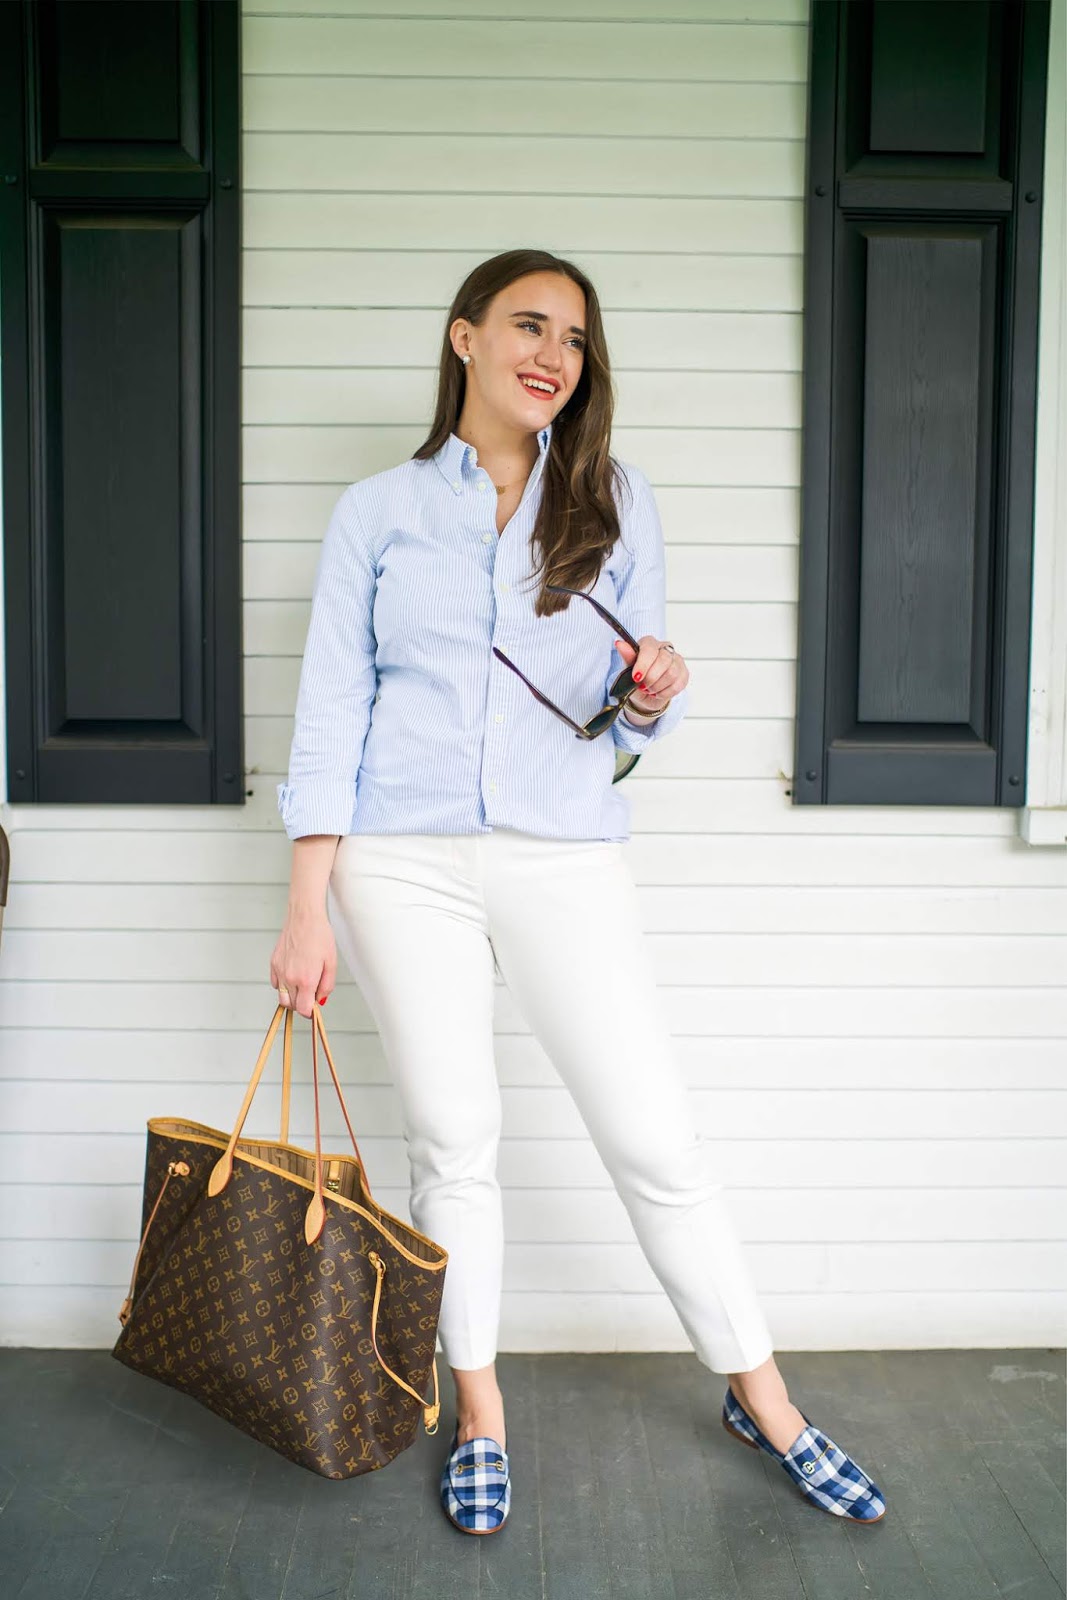 J.Crew Business Casual White Pants featured by popular New York style blogger, Covering the Bases